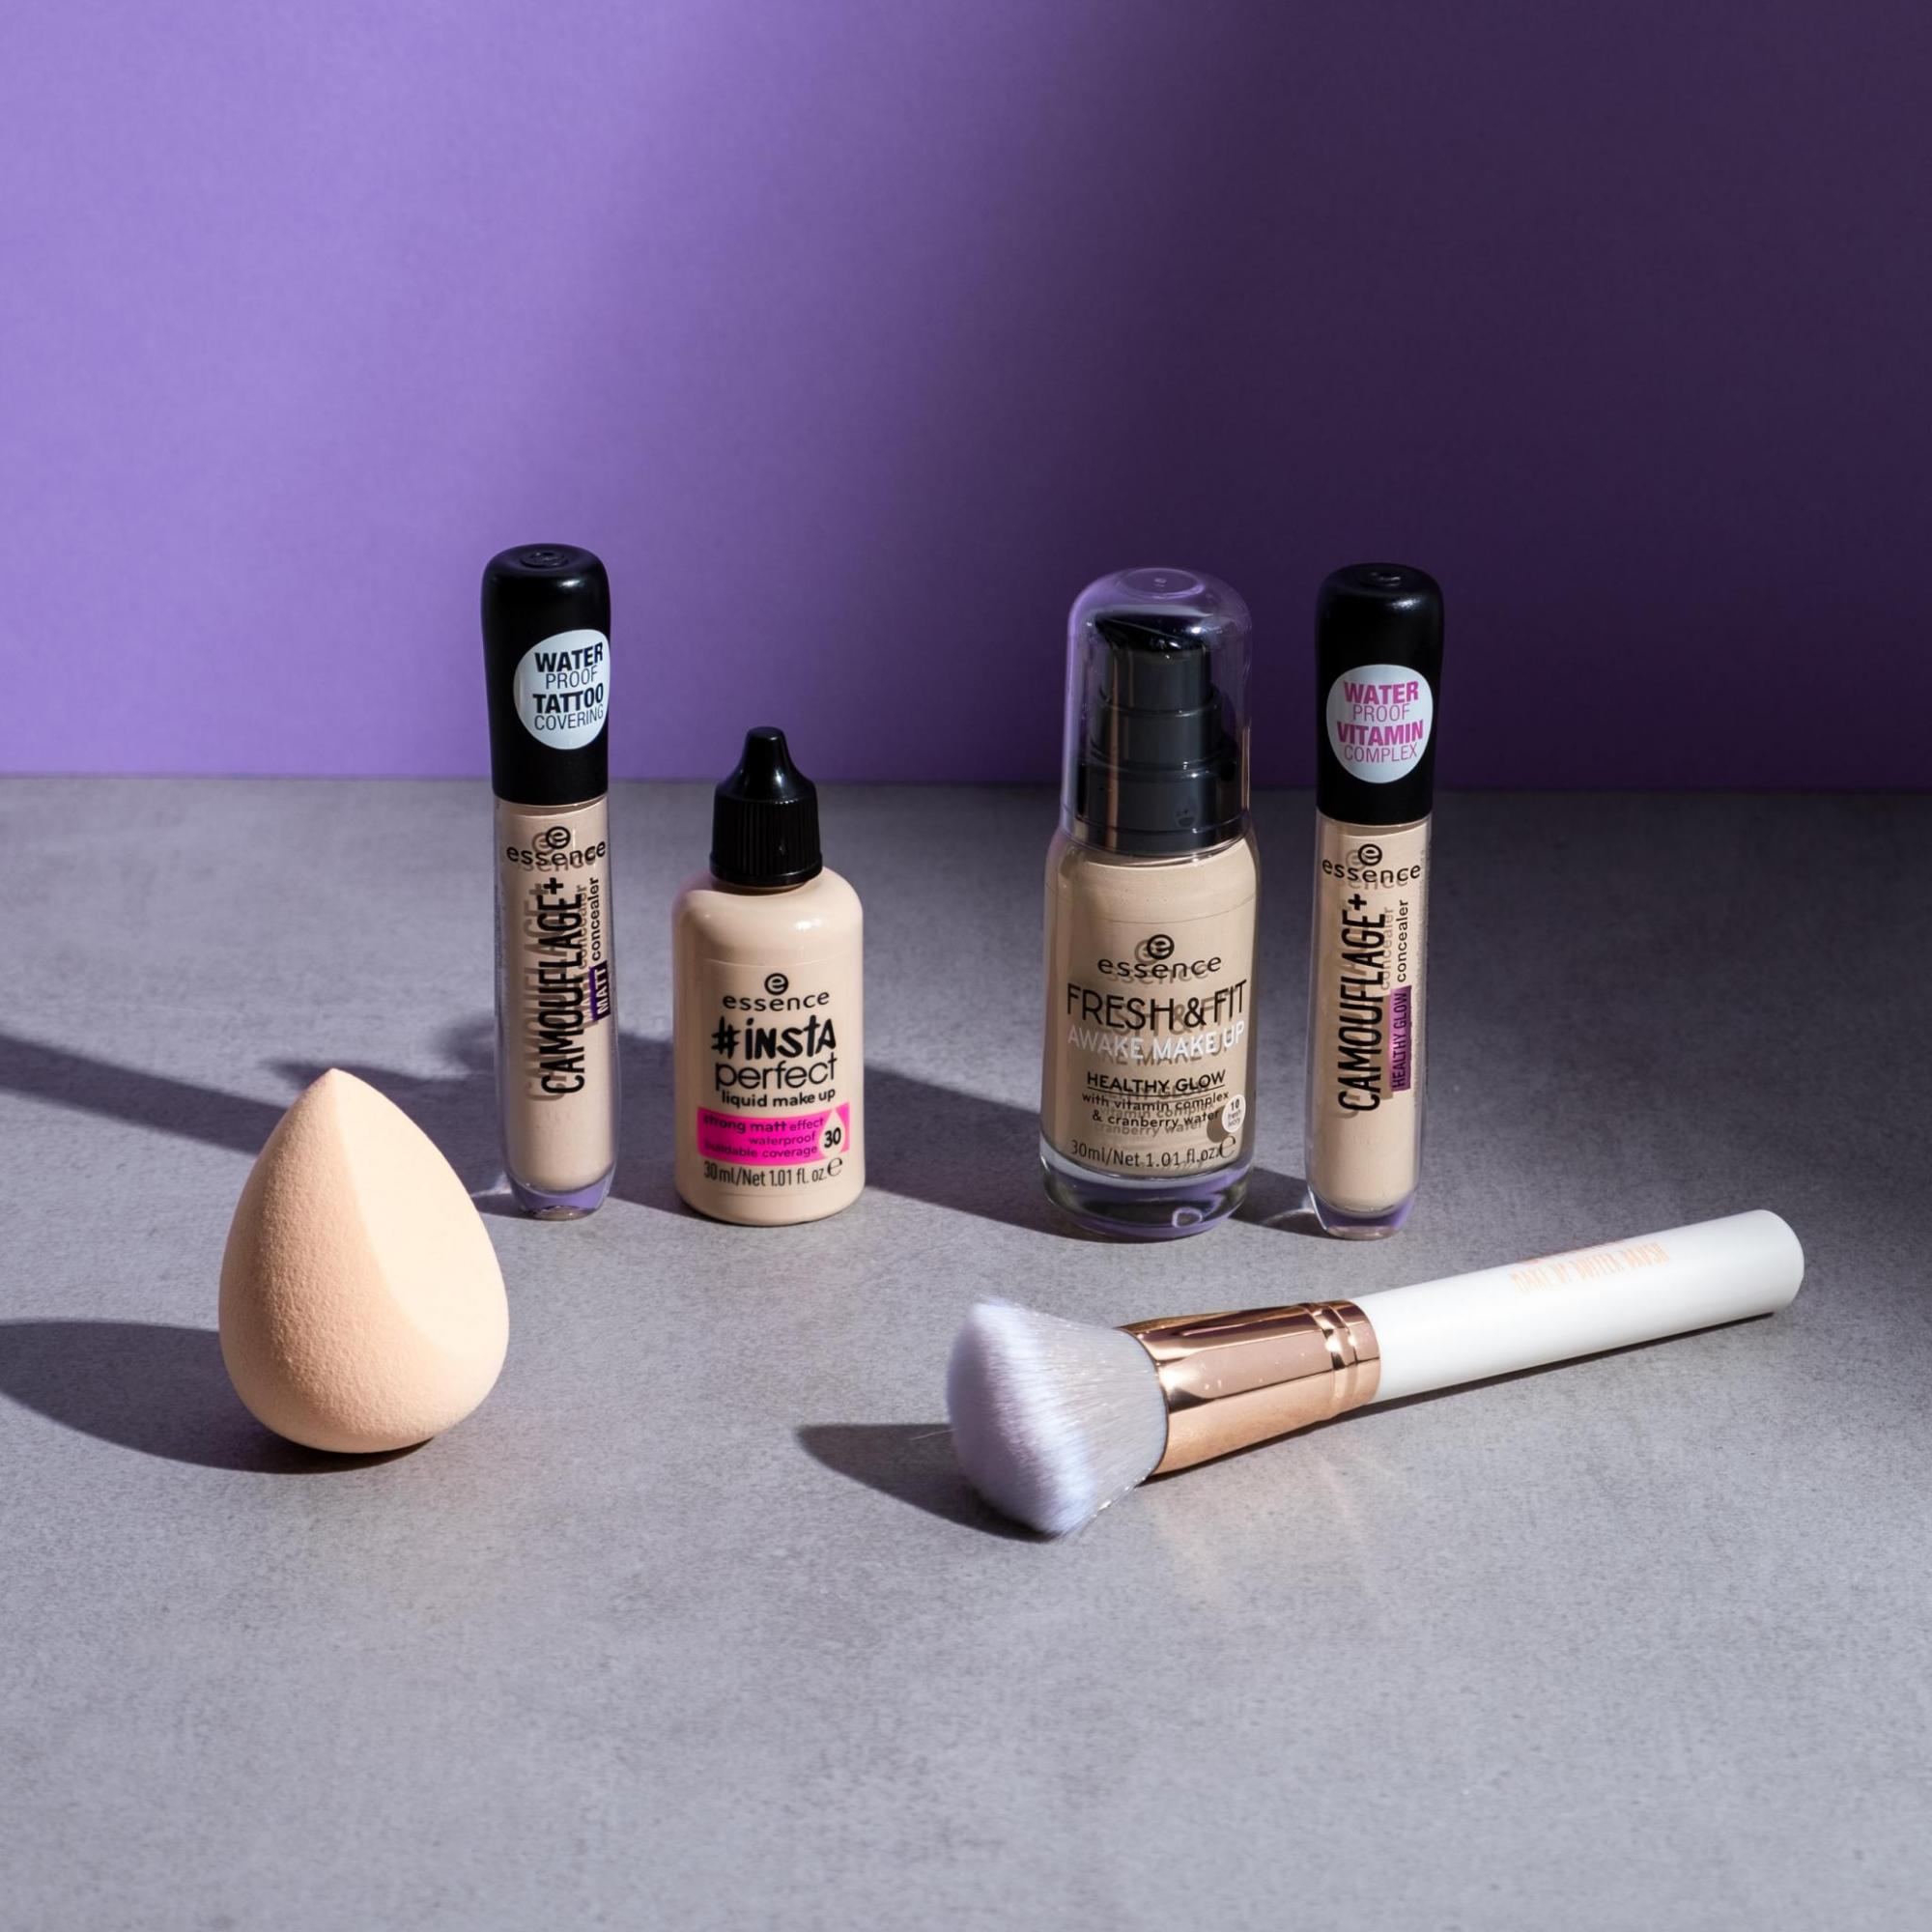 essence cosmetics UK on "our &amp; baking sponge and the makeup-buffer brush are the ideal team when it comes to blending foundation and concealer 😍 https://t.co/8M82rxnGda" / Twitter